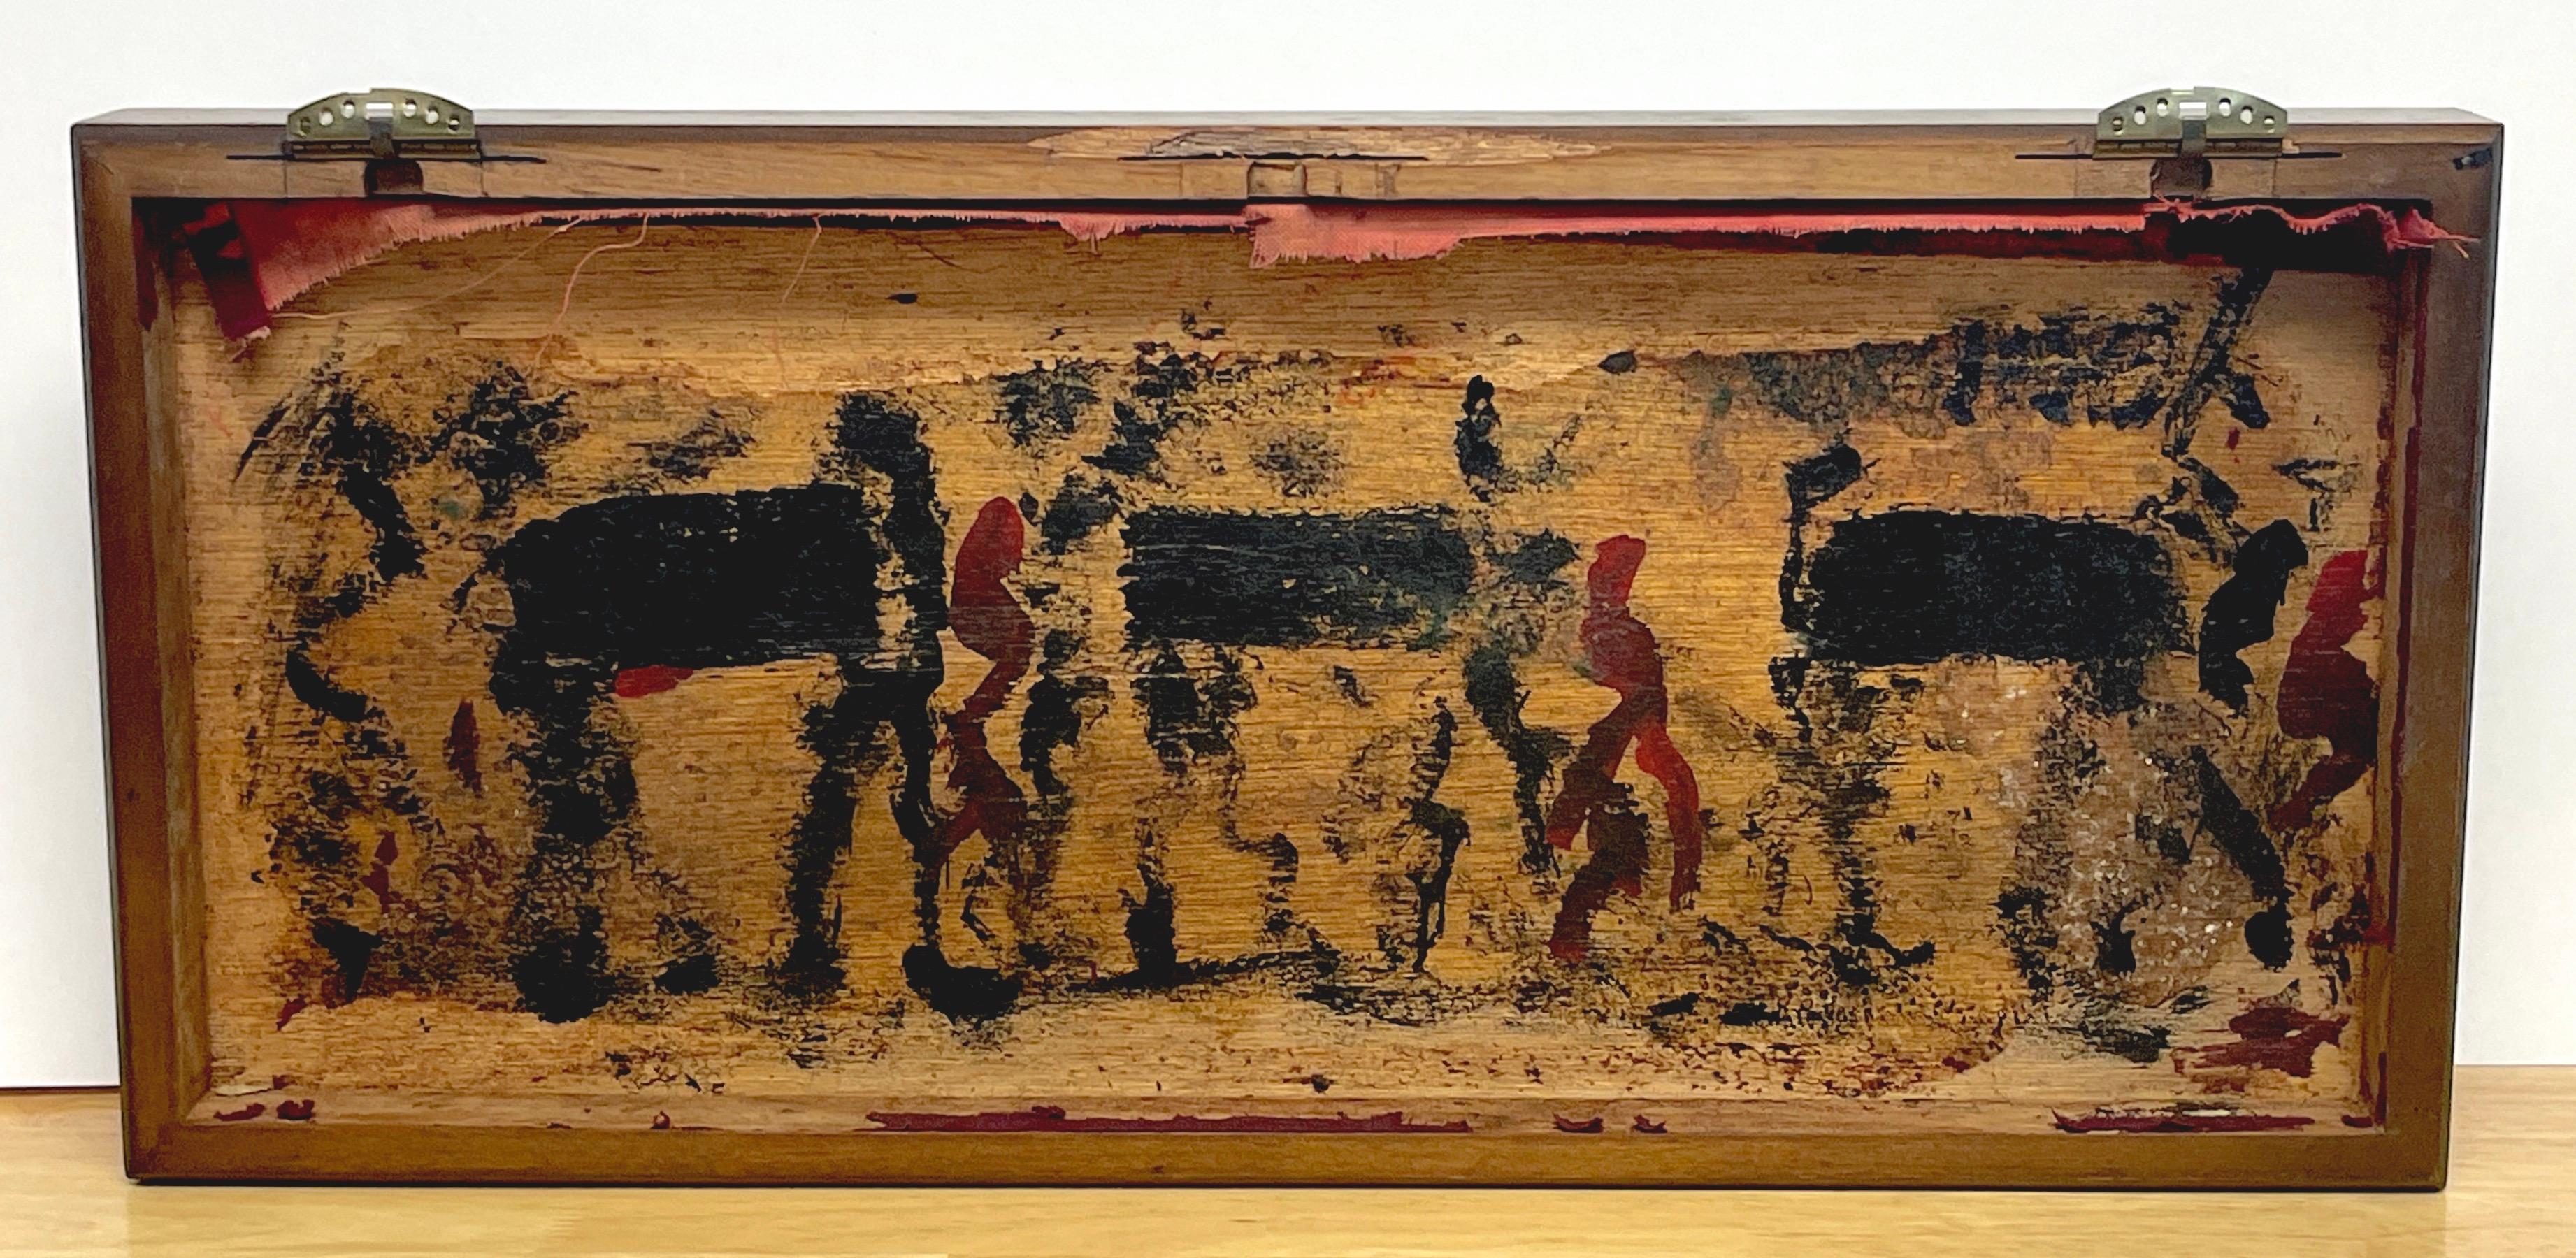 JFK MLK RFK- NO MORE DREAMS
Purvis Young (1989-1999)

A moving mourning work, depicting a funeral procession of John F. Kennedy, Martin L. King and Robert F. Kennedy. 

Painted on a found object a wood metal hinged lid, with remnants of